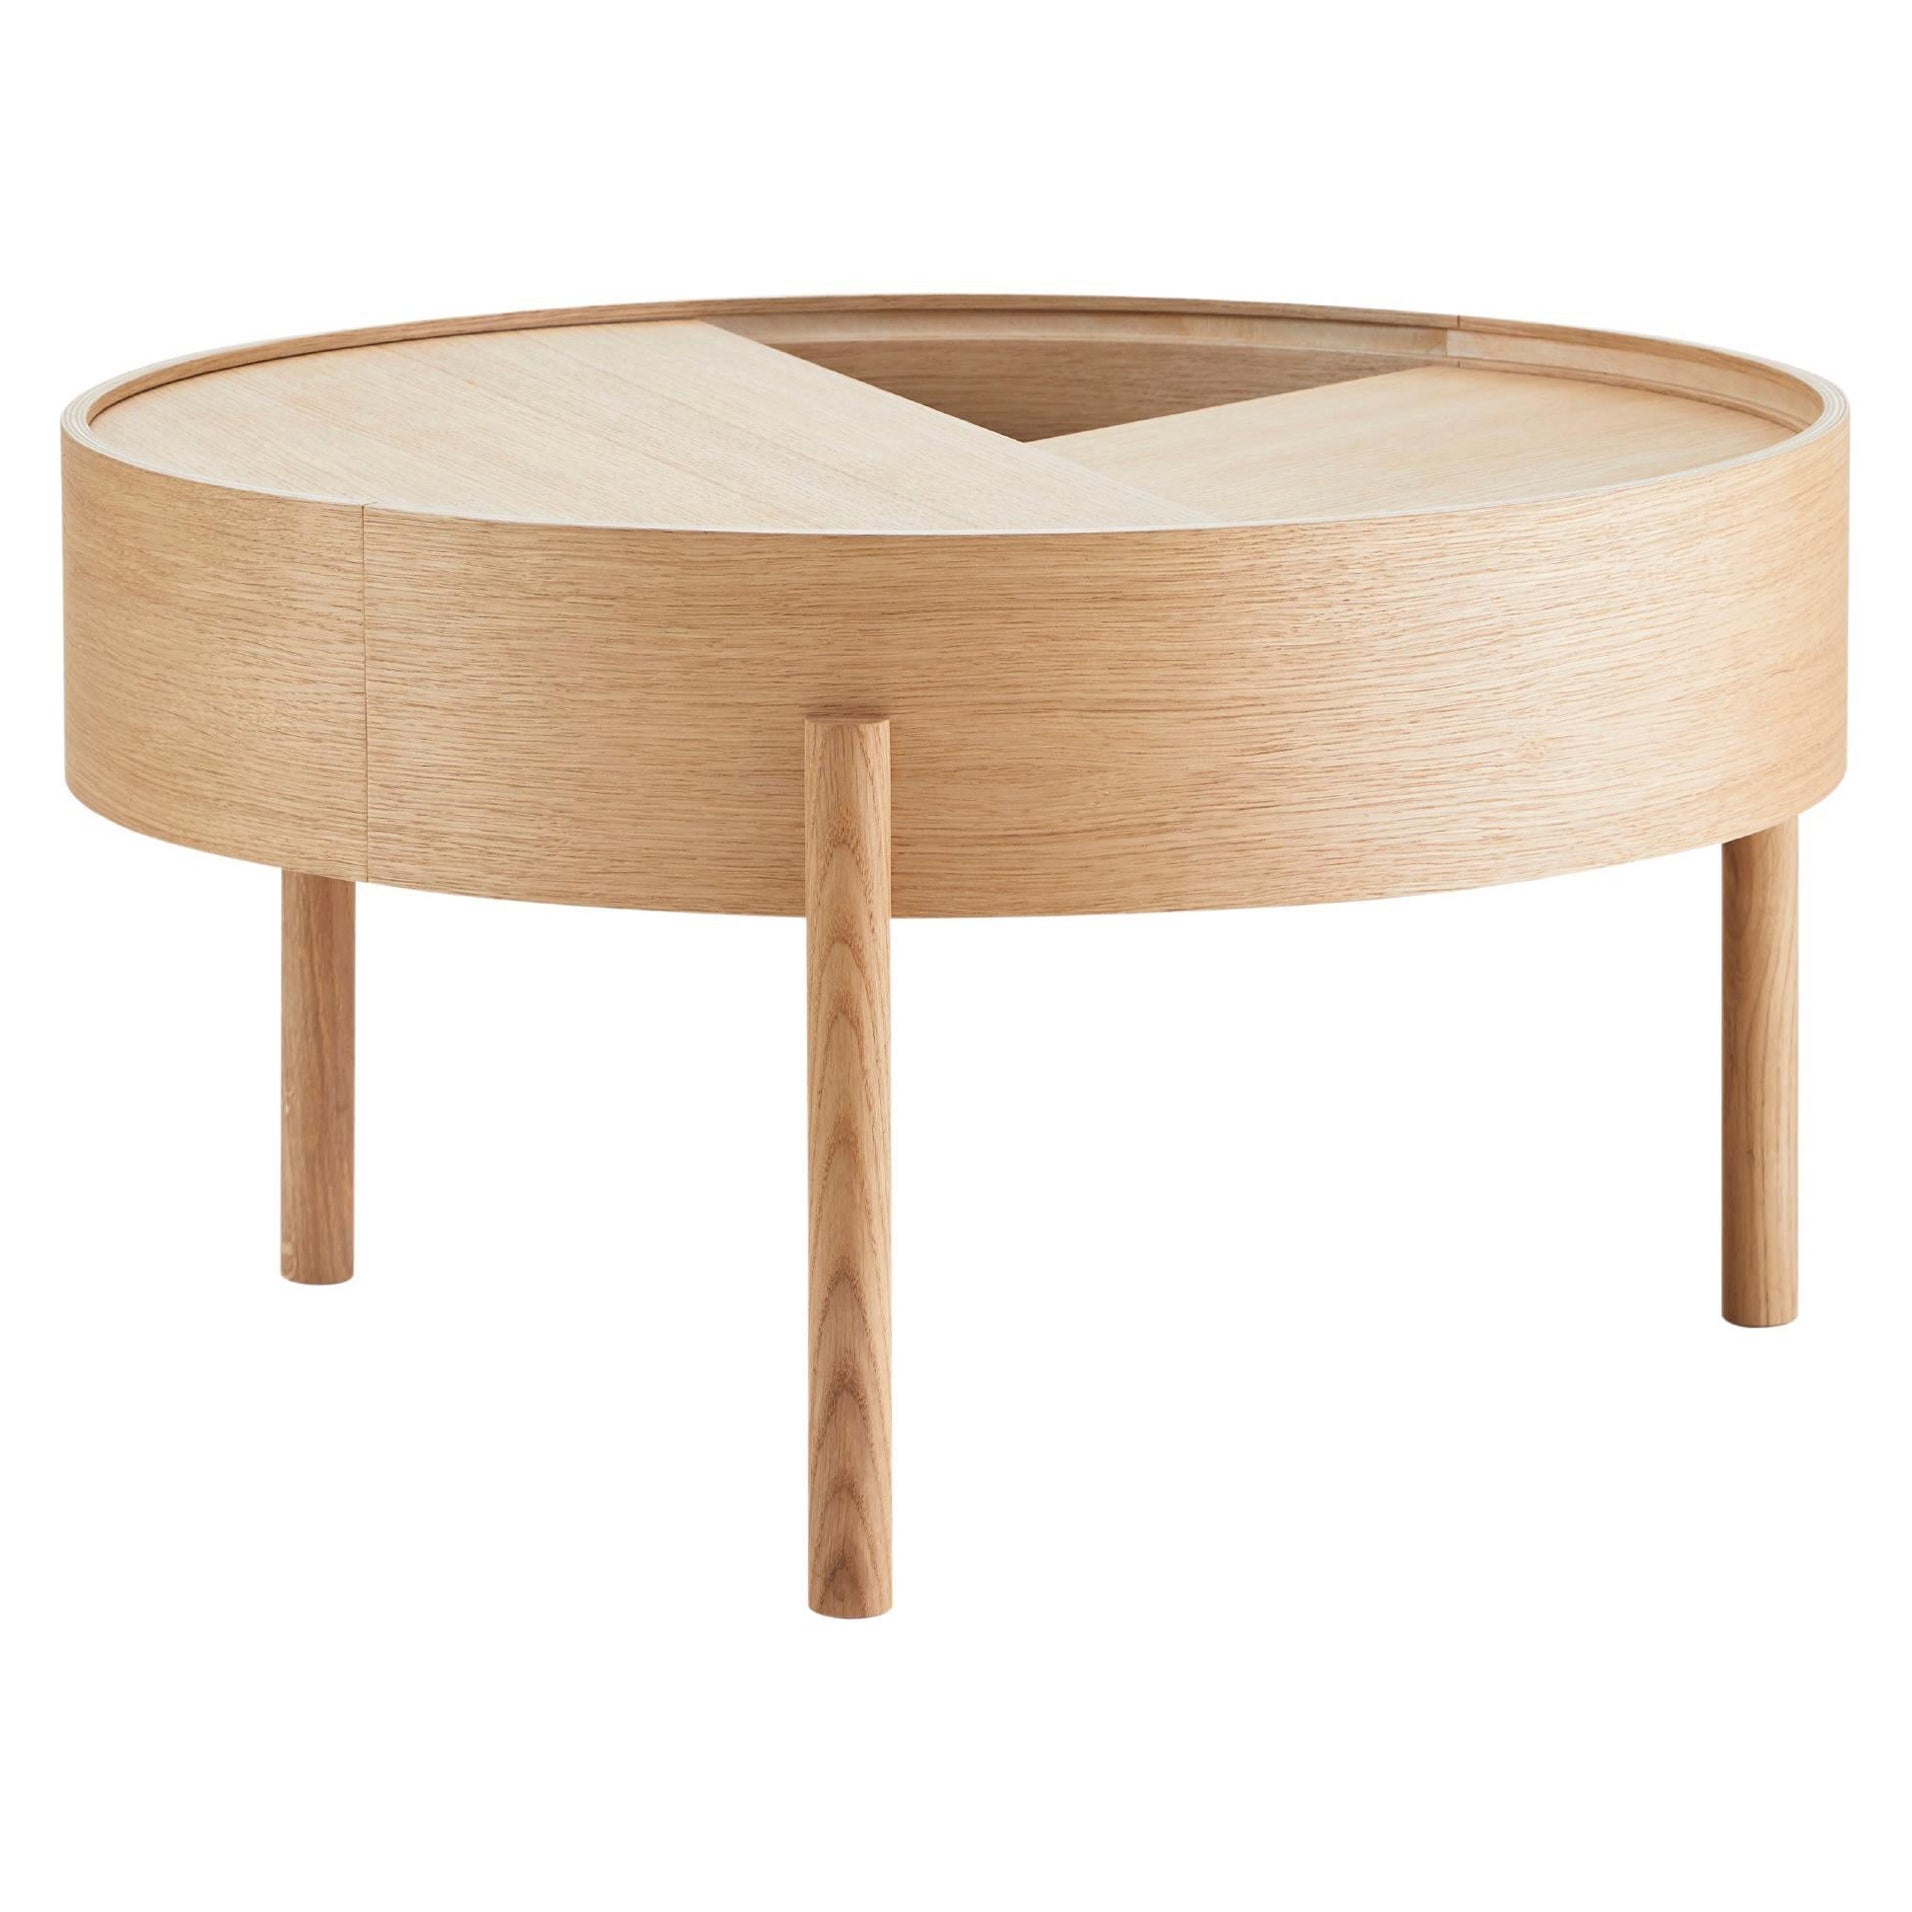 Oiled Oak Arc Coffee Table 66 by Ditte Vad and Julie Bertrup